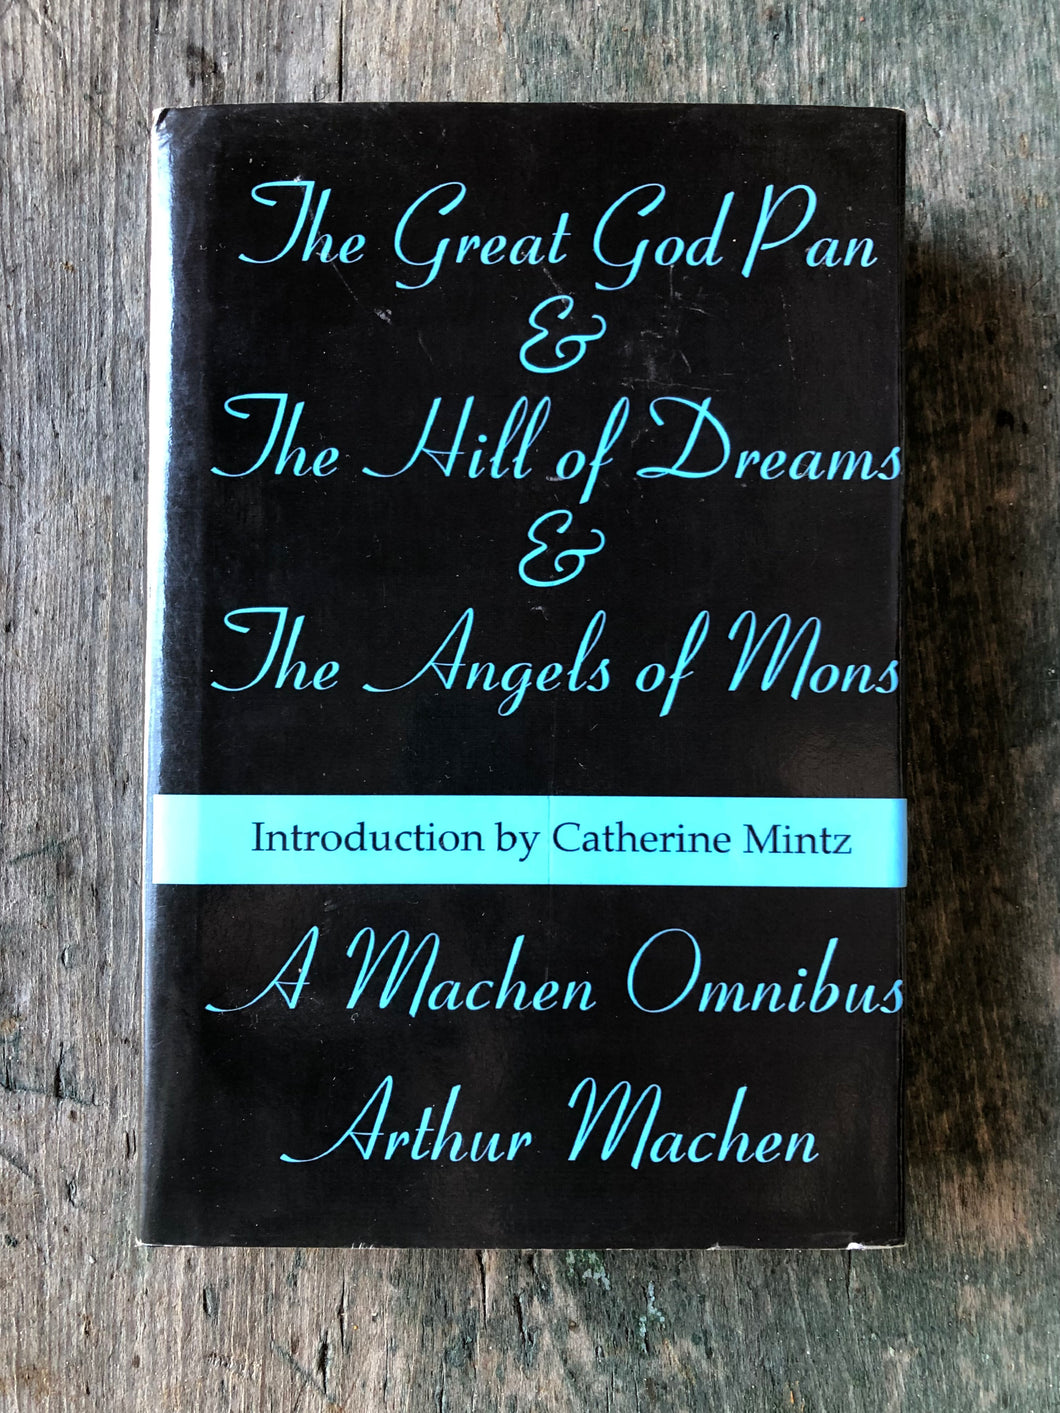 The Great God Pan & The Hill of Dreams & The Angels of Mons by Arthur Machen with an introduction by Catherine Mintz